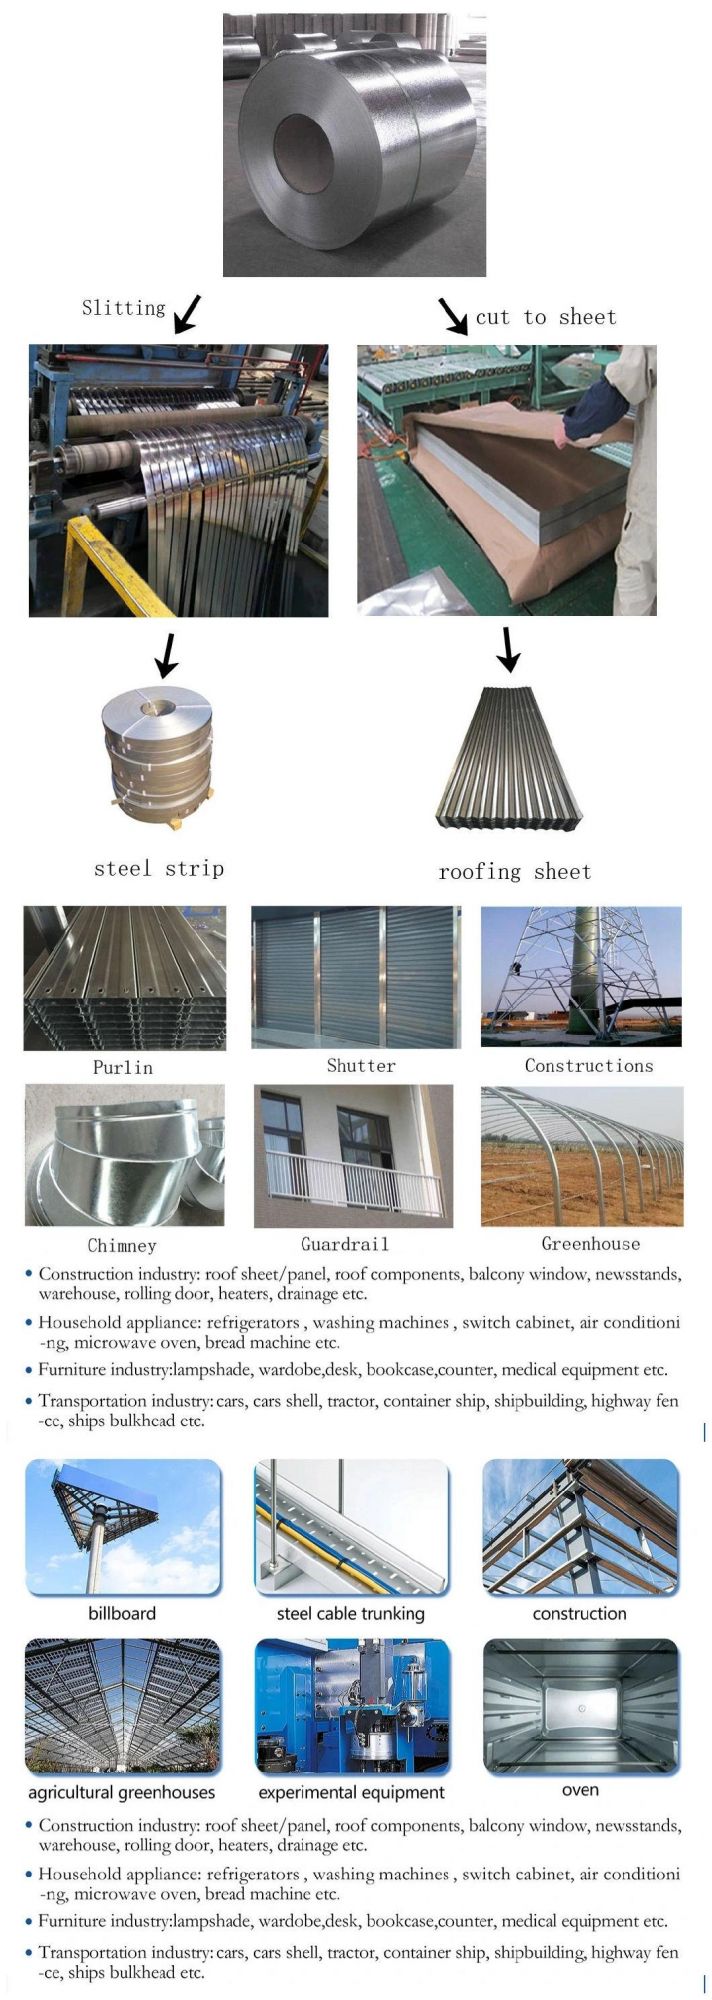 Good Quality Gi Coils 0.18X1000mm Galvanized Sheet Steel Coil with Cheap Price